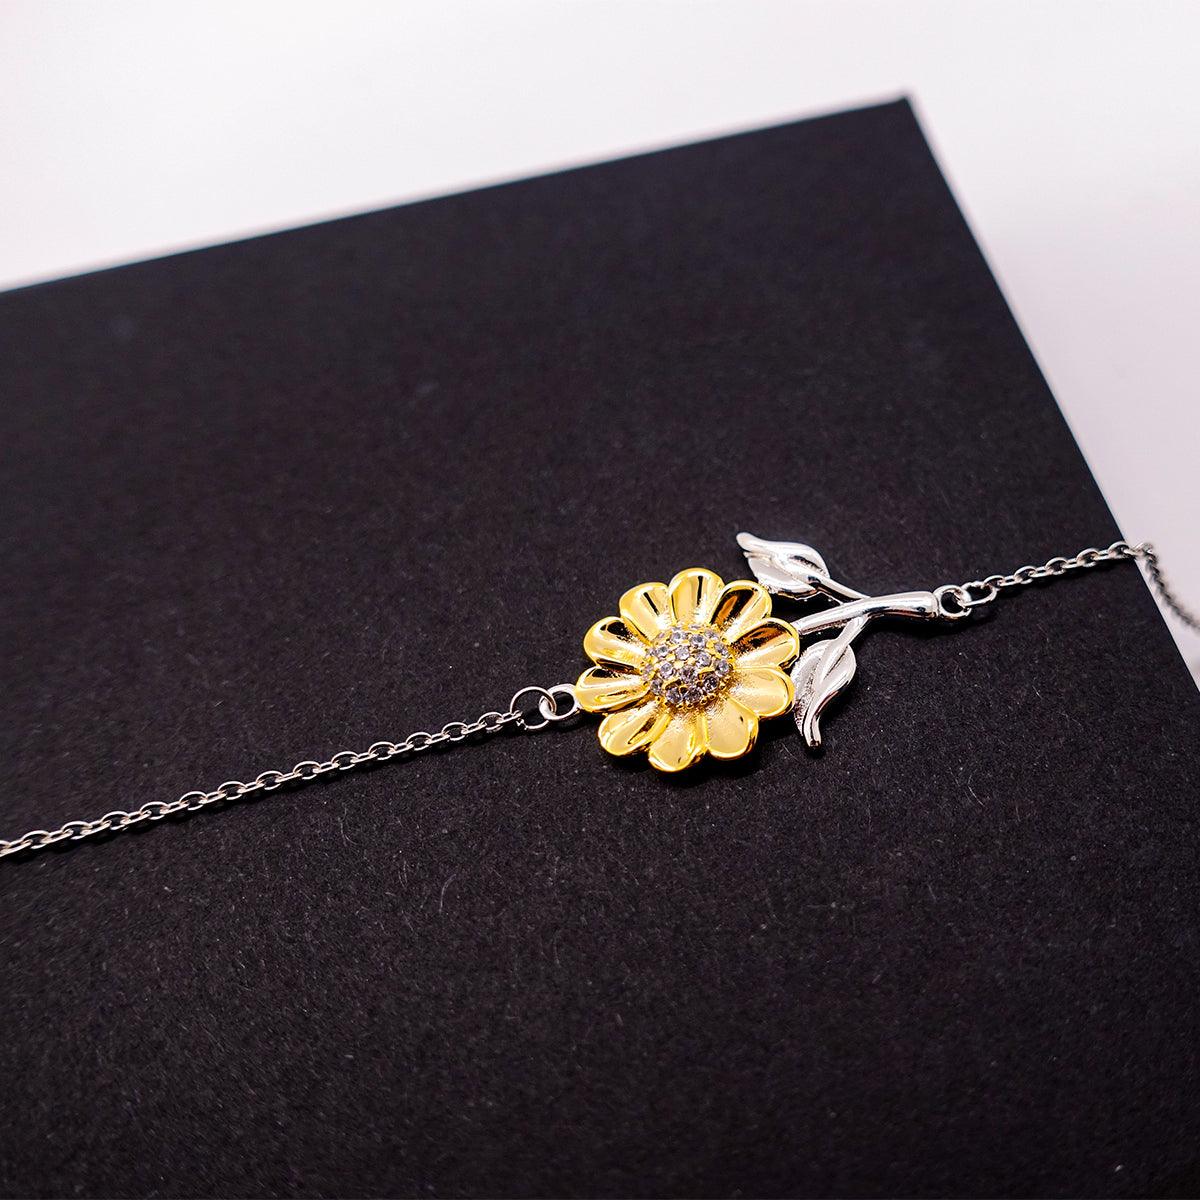 Remarkable Ambulance Driver Gifts, Your dedication and hard work, Inspirational Birthday Christmas Unique Sunflower Bracelet For Ambulance Driver, Coworkers, Men, Women, Friends - Mallard Moon Gift Shop